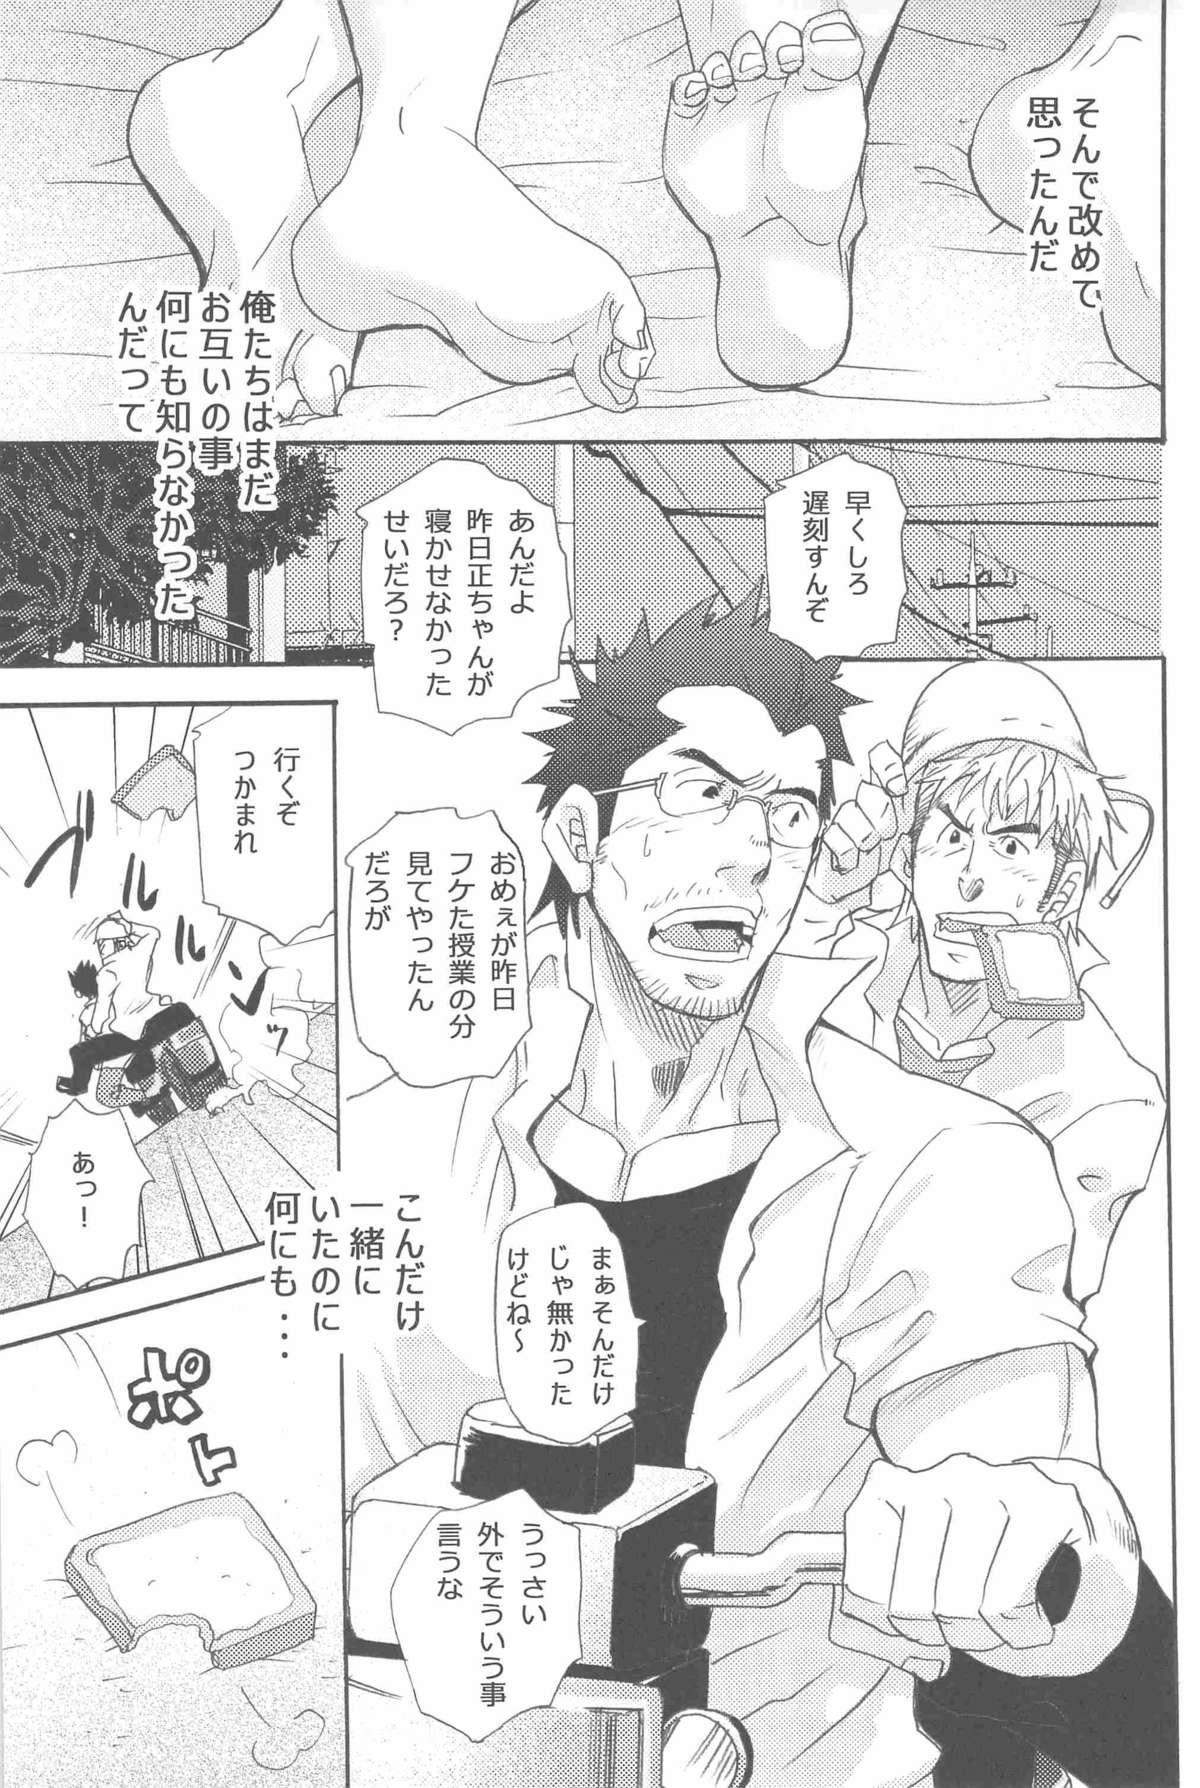 [MATSU Takeshi] More and More of You 5 page 15 full